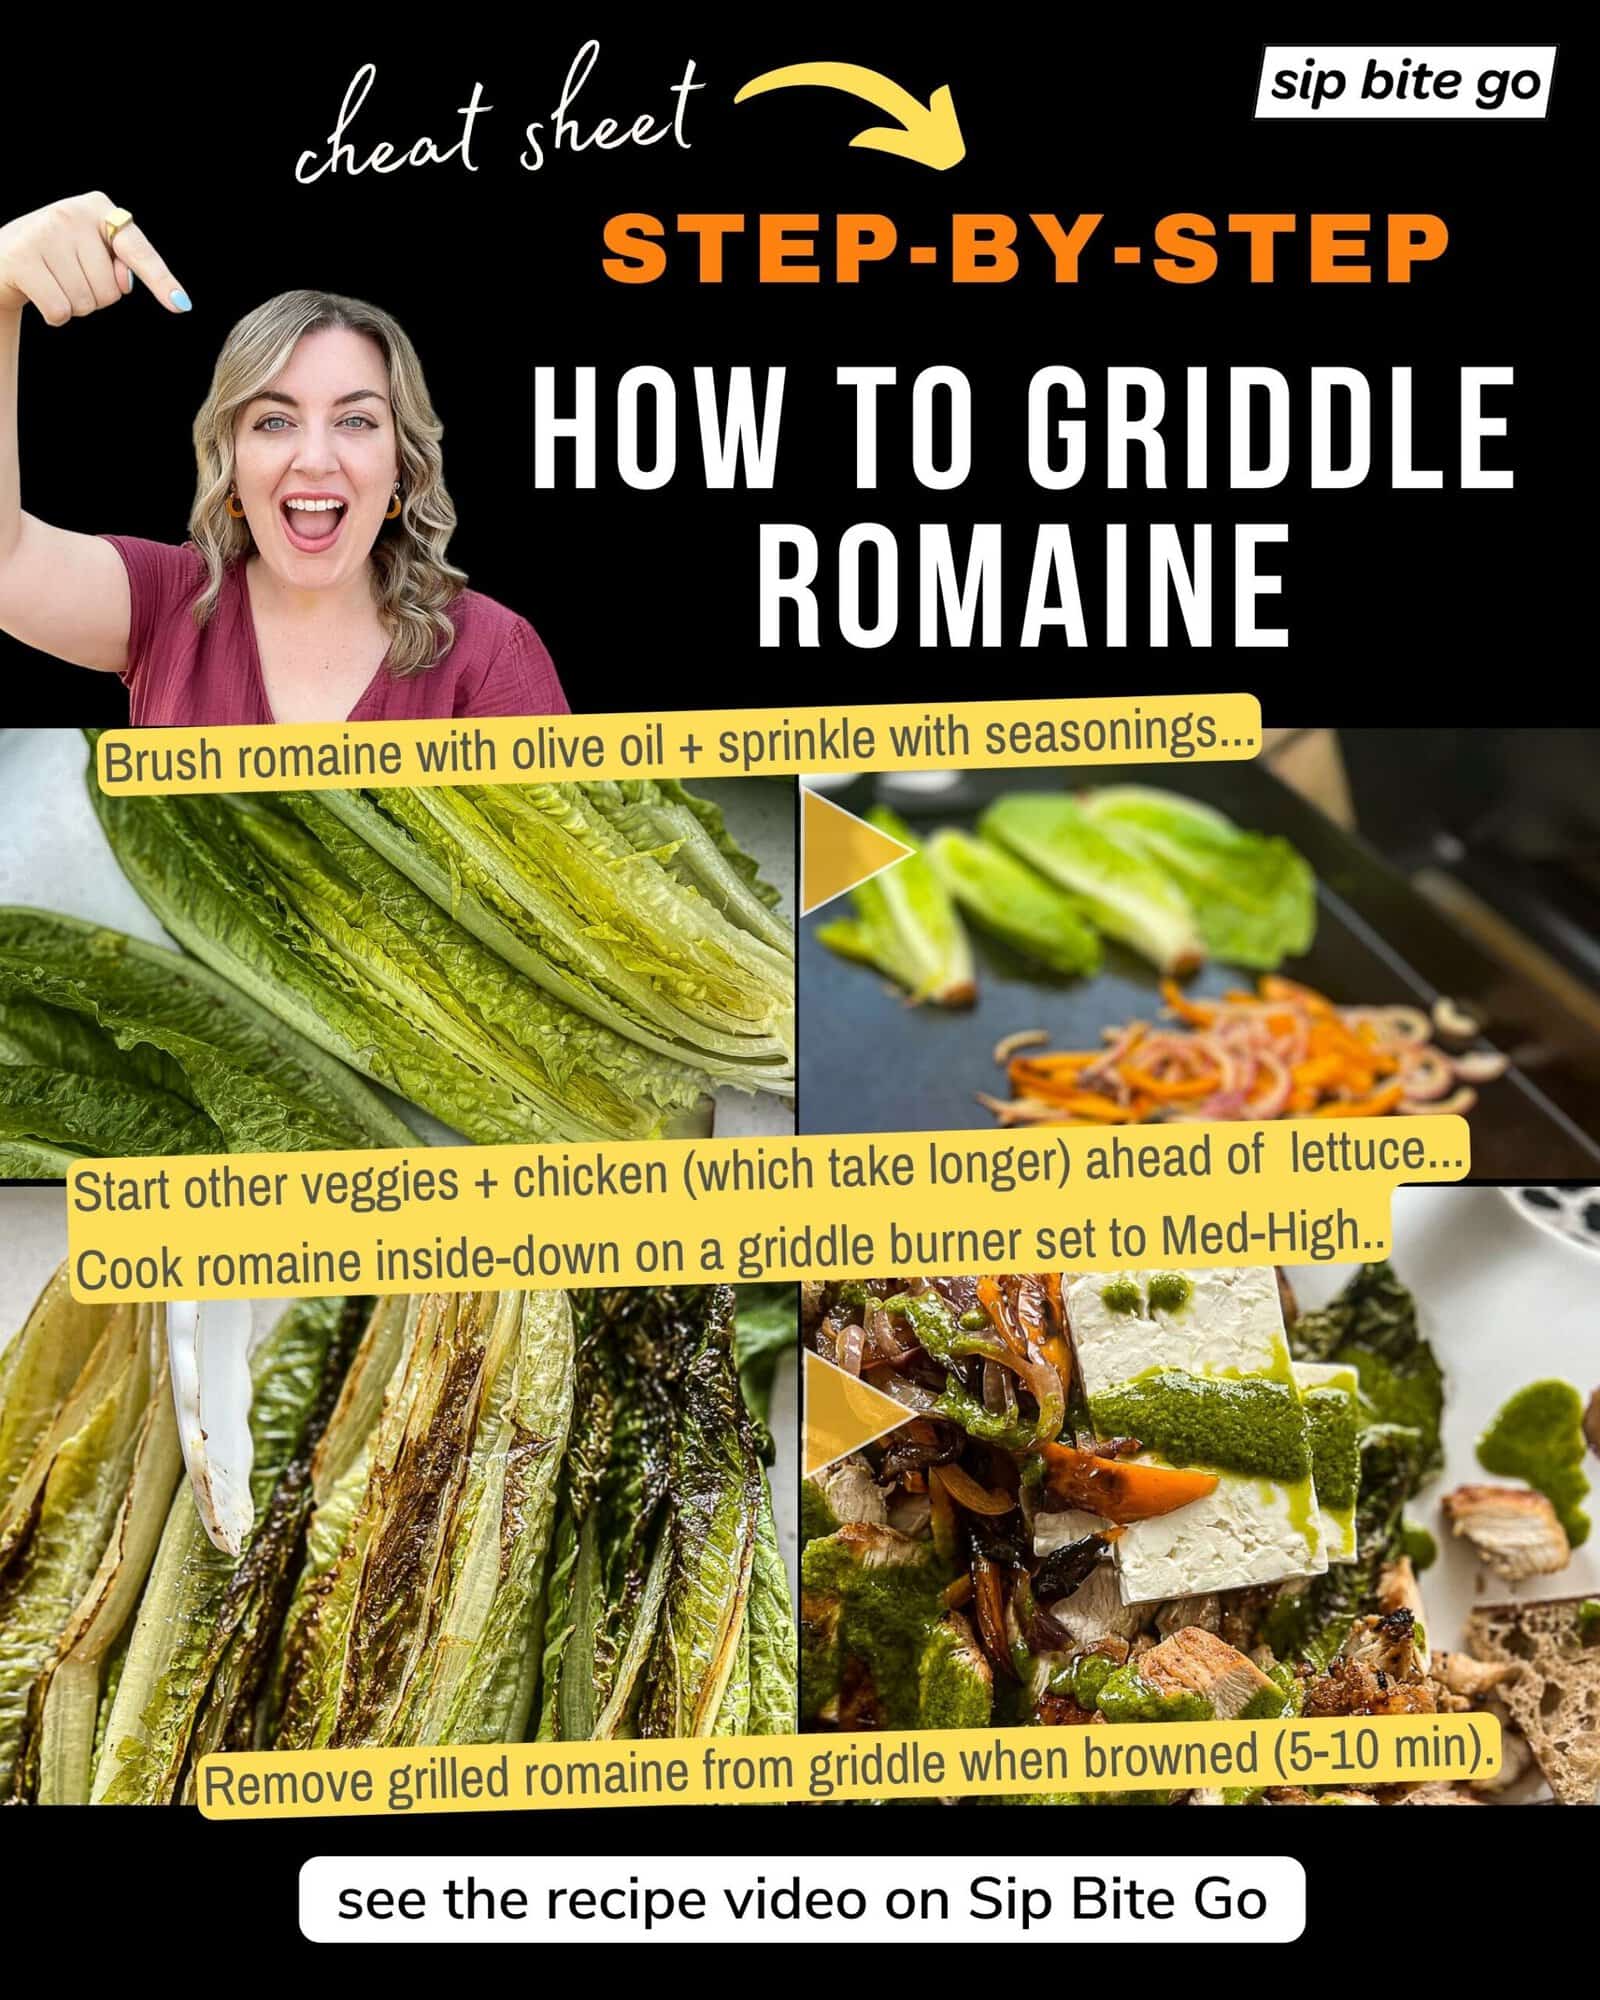 Infographic with recipe steps and captions demonstrating how to griddle grill romaine lettuce for salad with Sip Bite Go logo